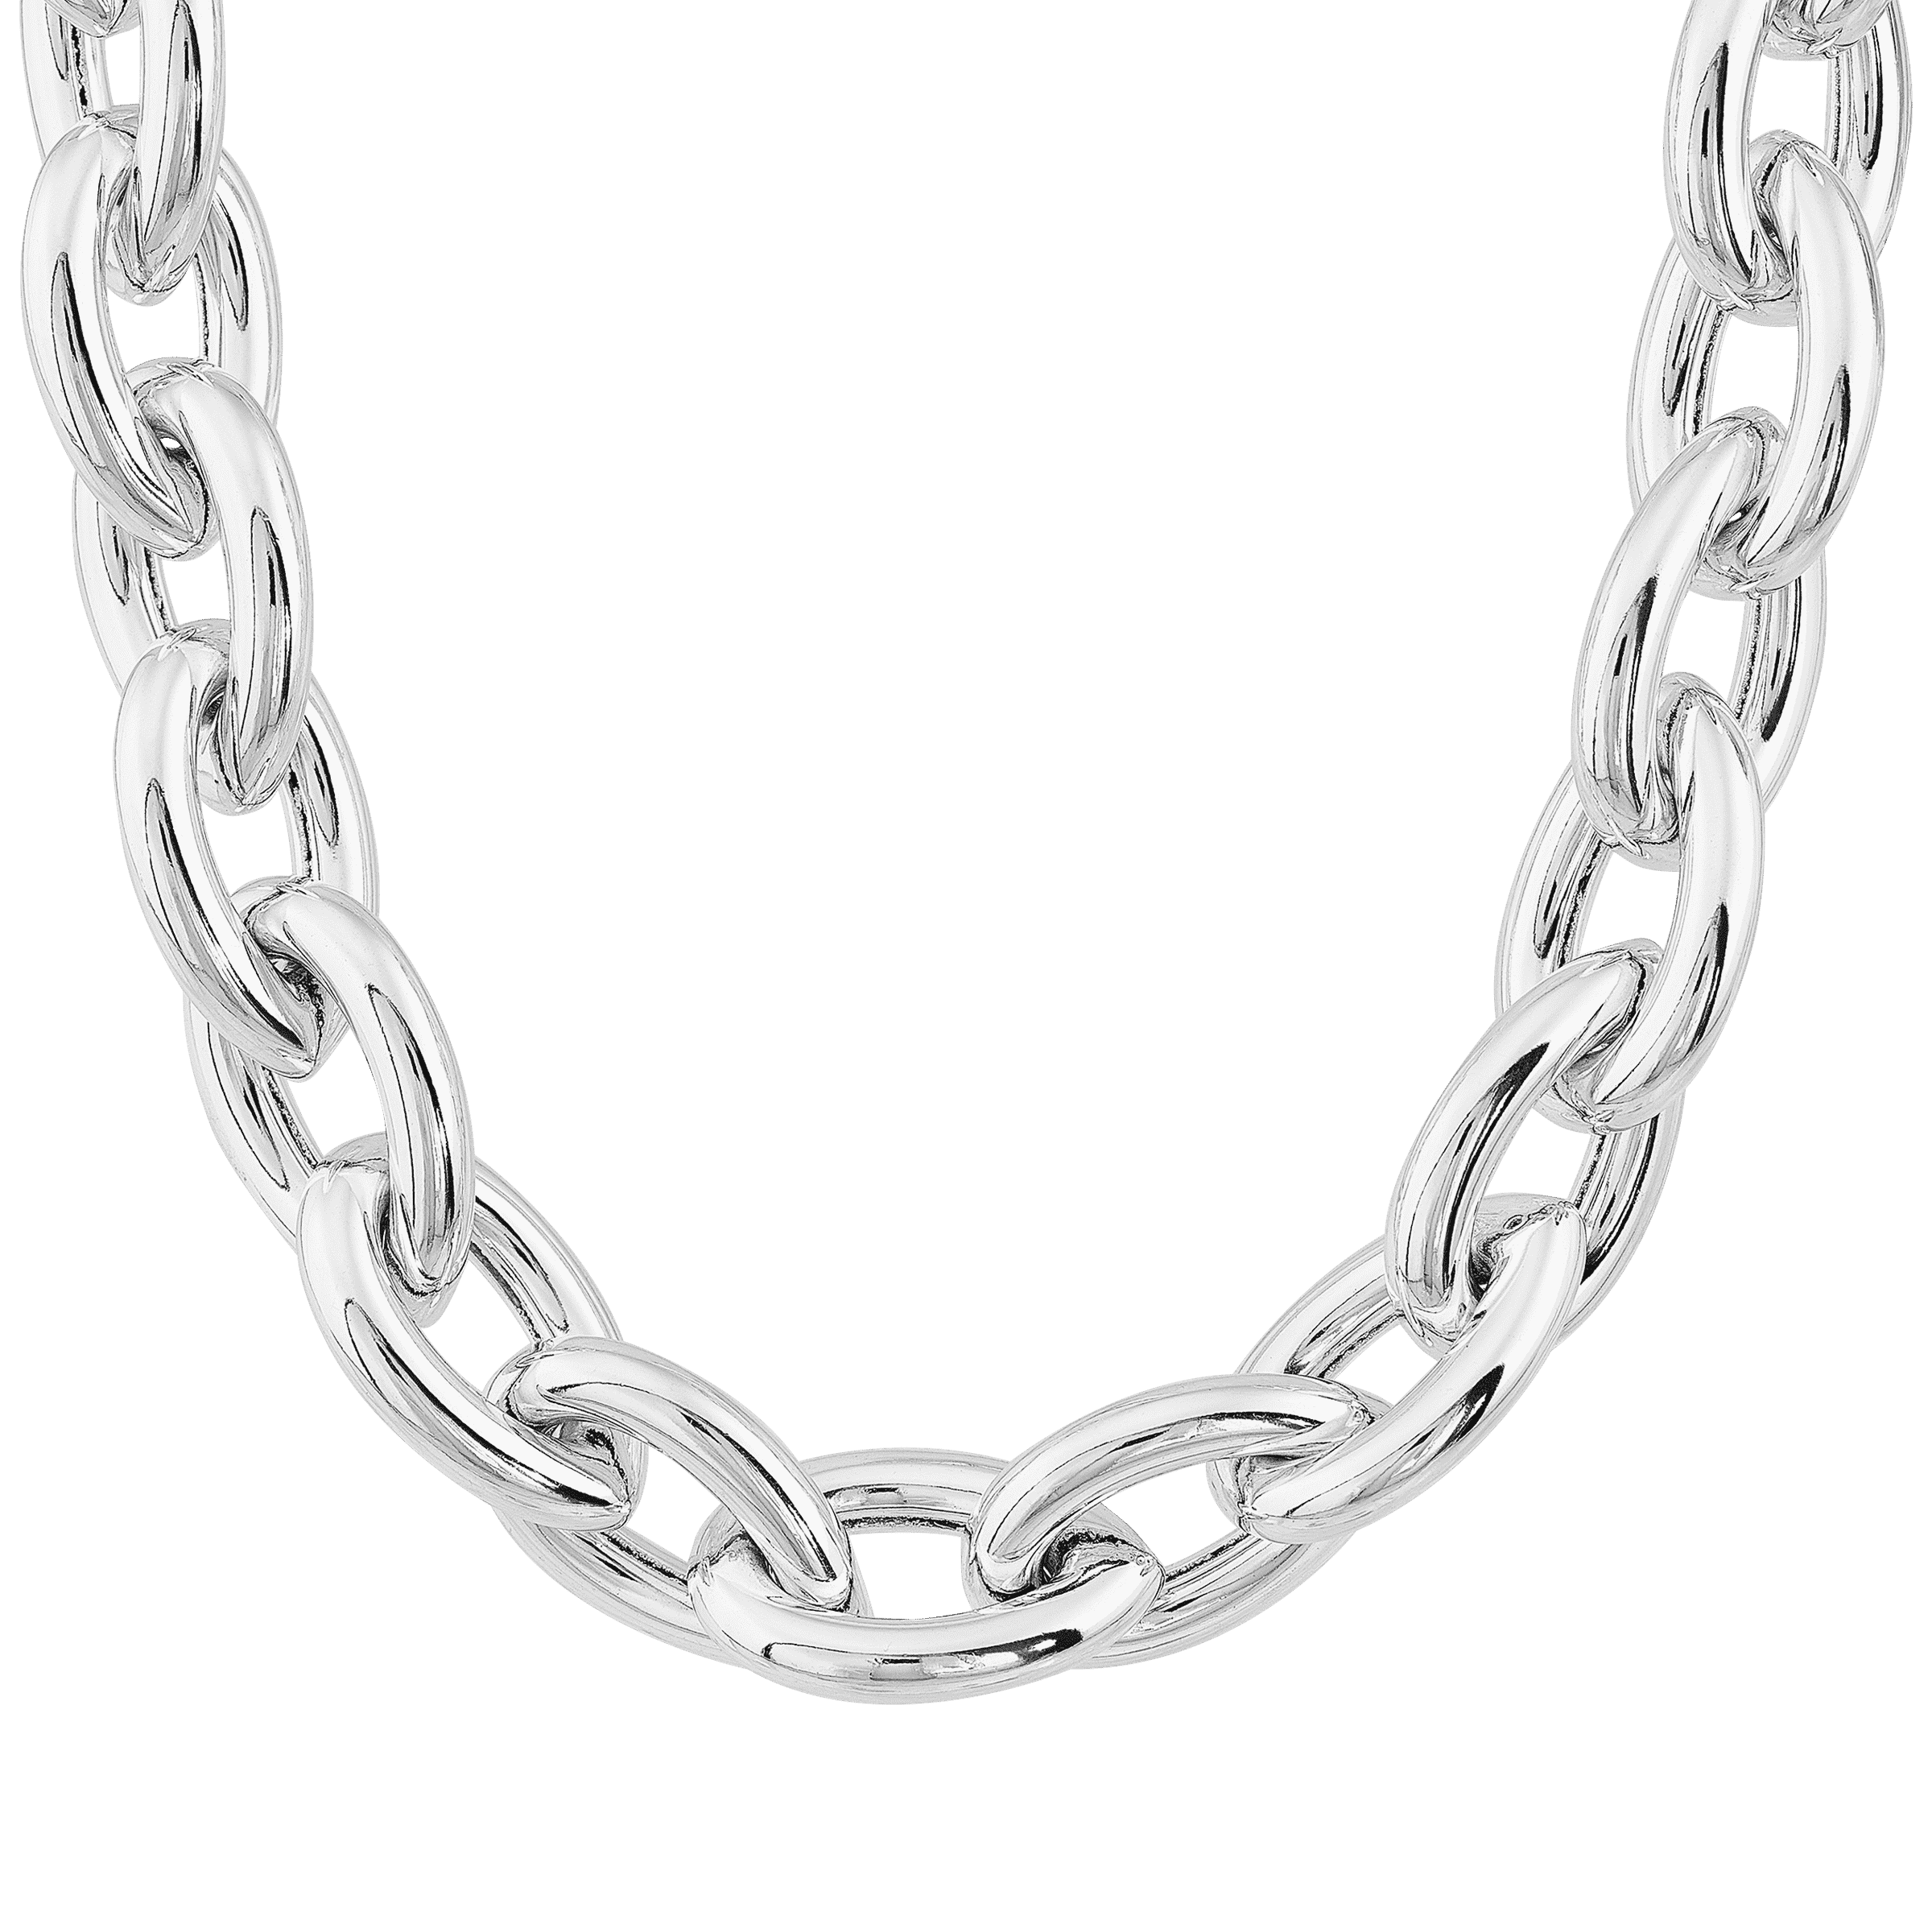 Silpada 'Doubled Up' Sterling Silver Chain Necklace, 32